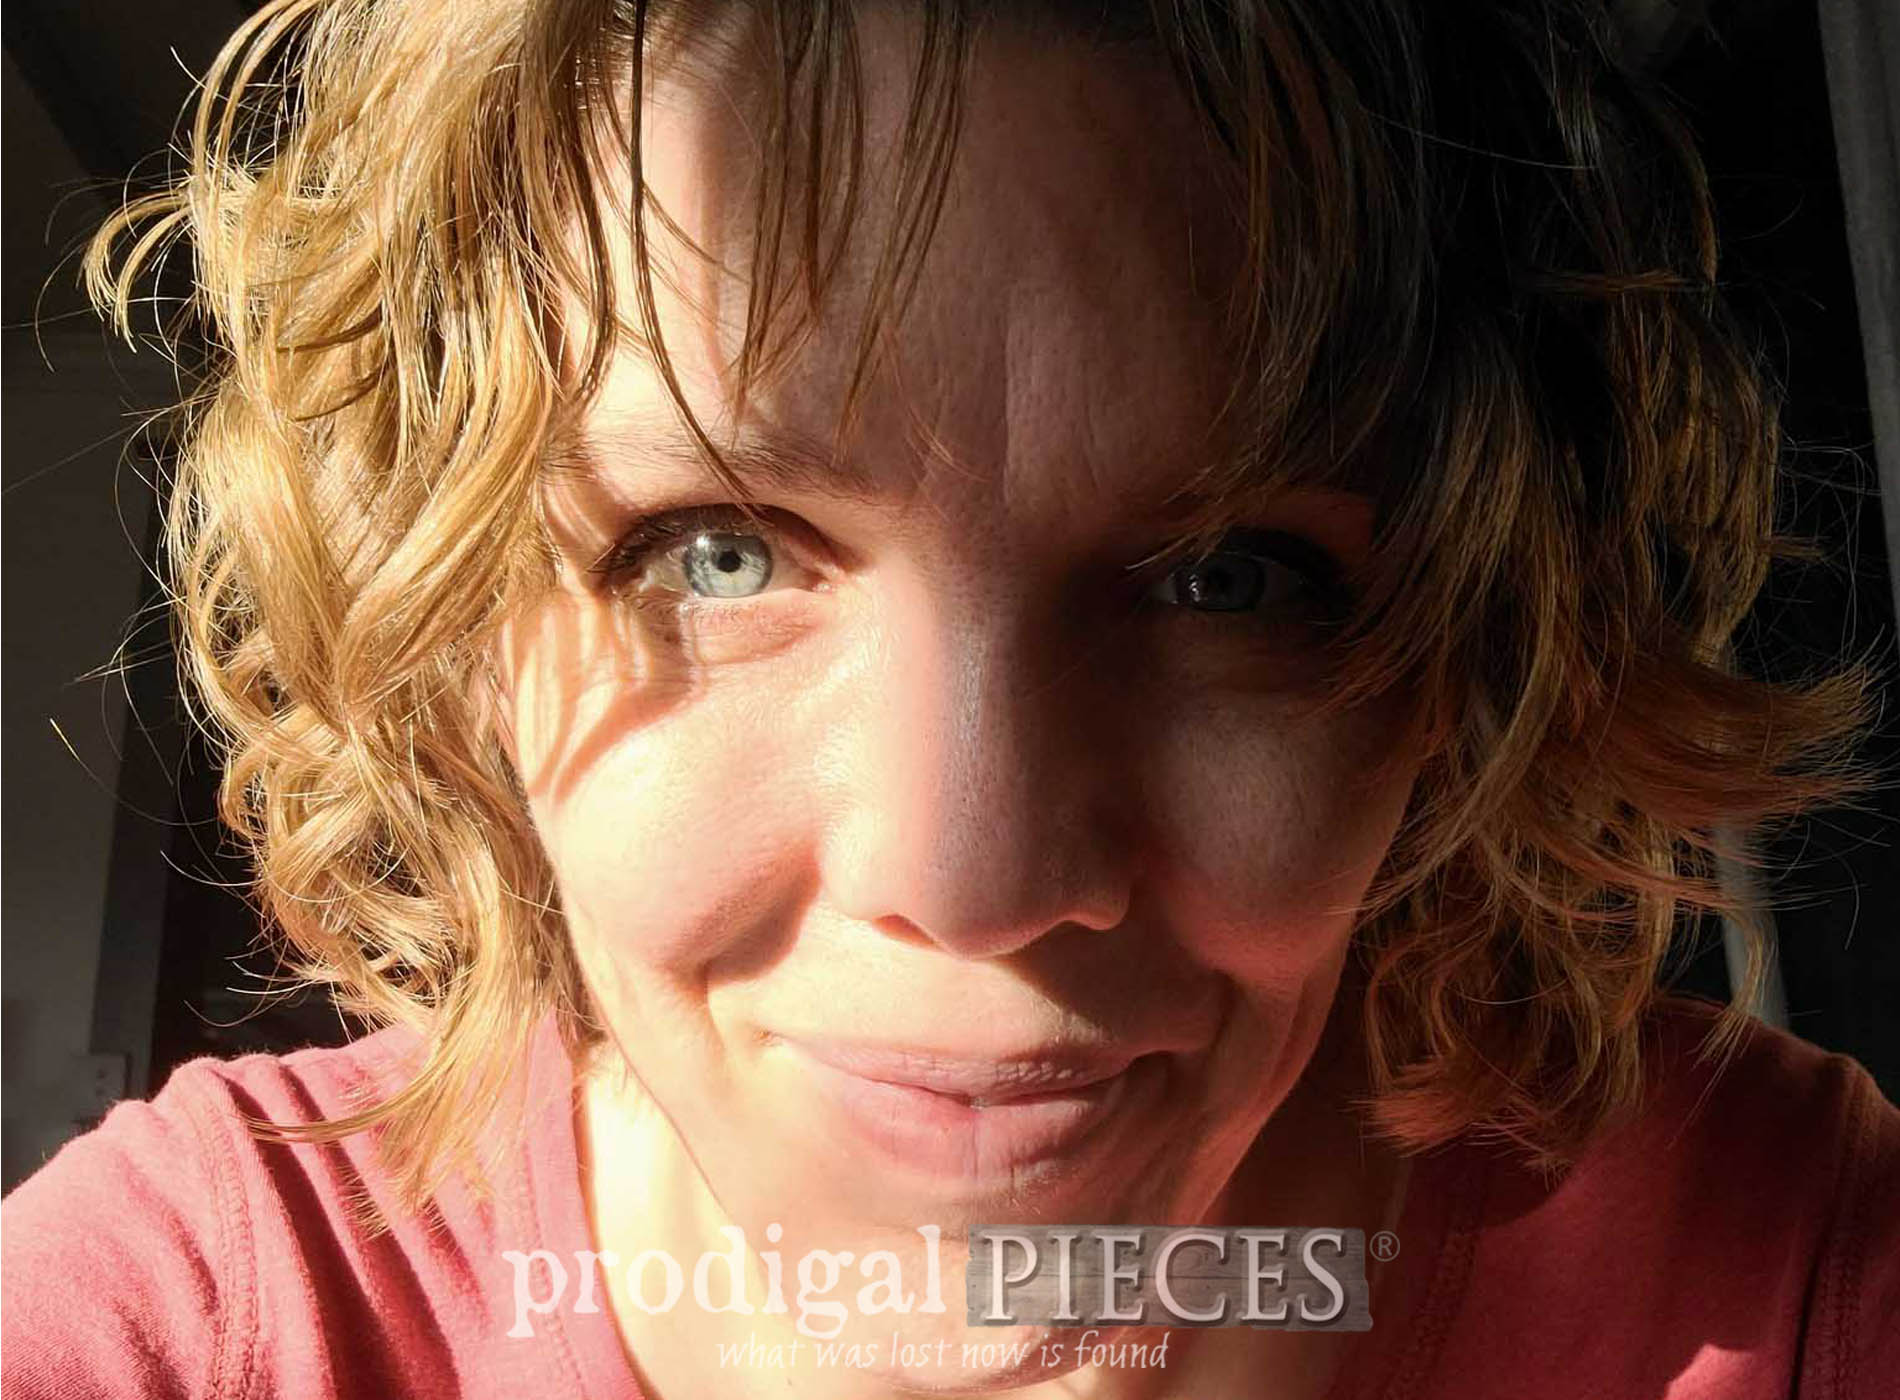 Featured Middle-Aged & Motivated an Inspiring Story by Larissa of Prodigal Pieces | prodigalpieces.com #prodigalpieces